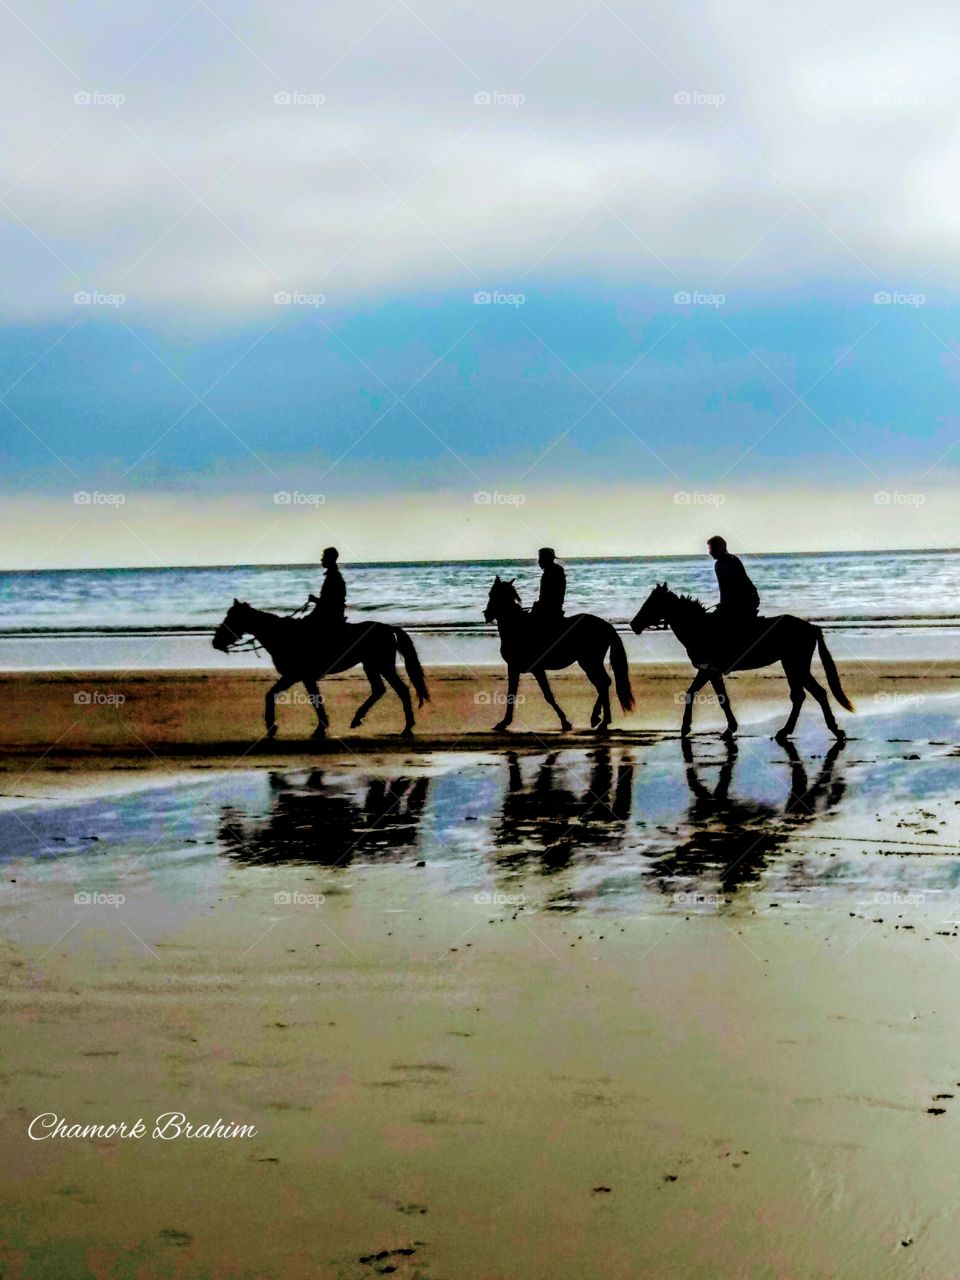 I was on a beach walking and these horses attracted my attention by their beauty.It is sooo amazing